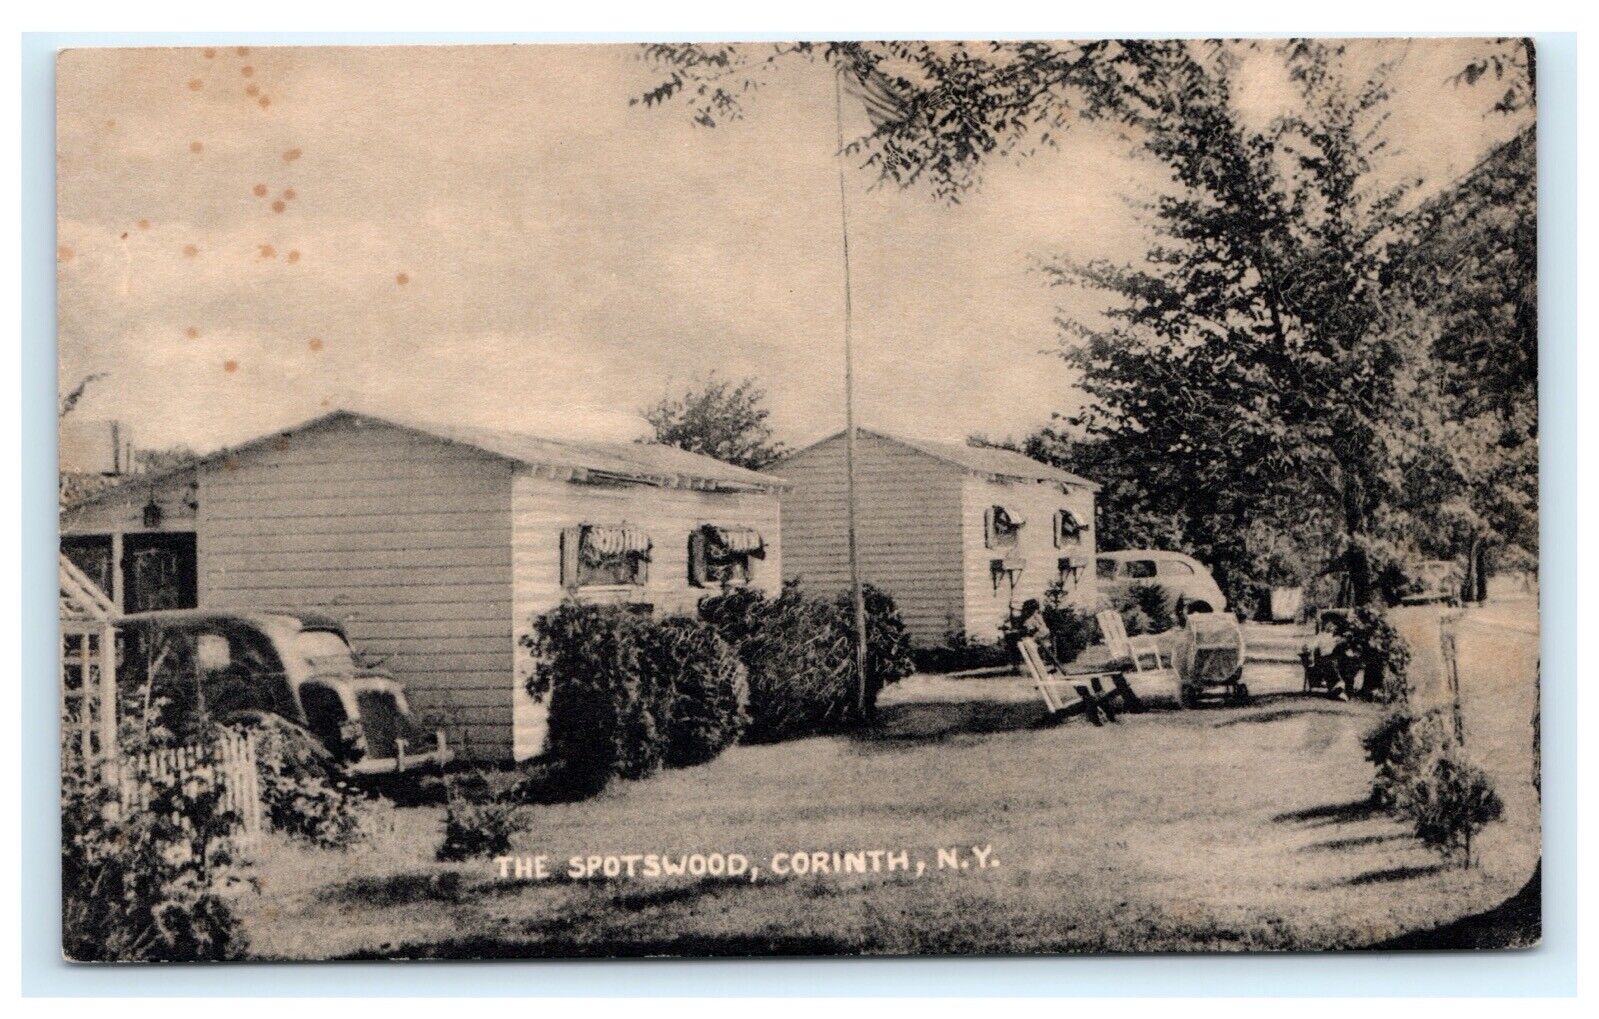 The Spotswood Cabins Camps Corinth NY Saratoga County Postcard A12